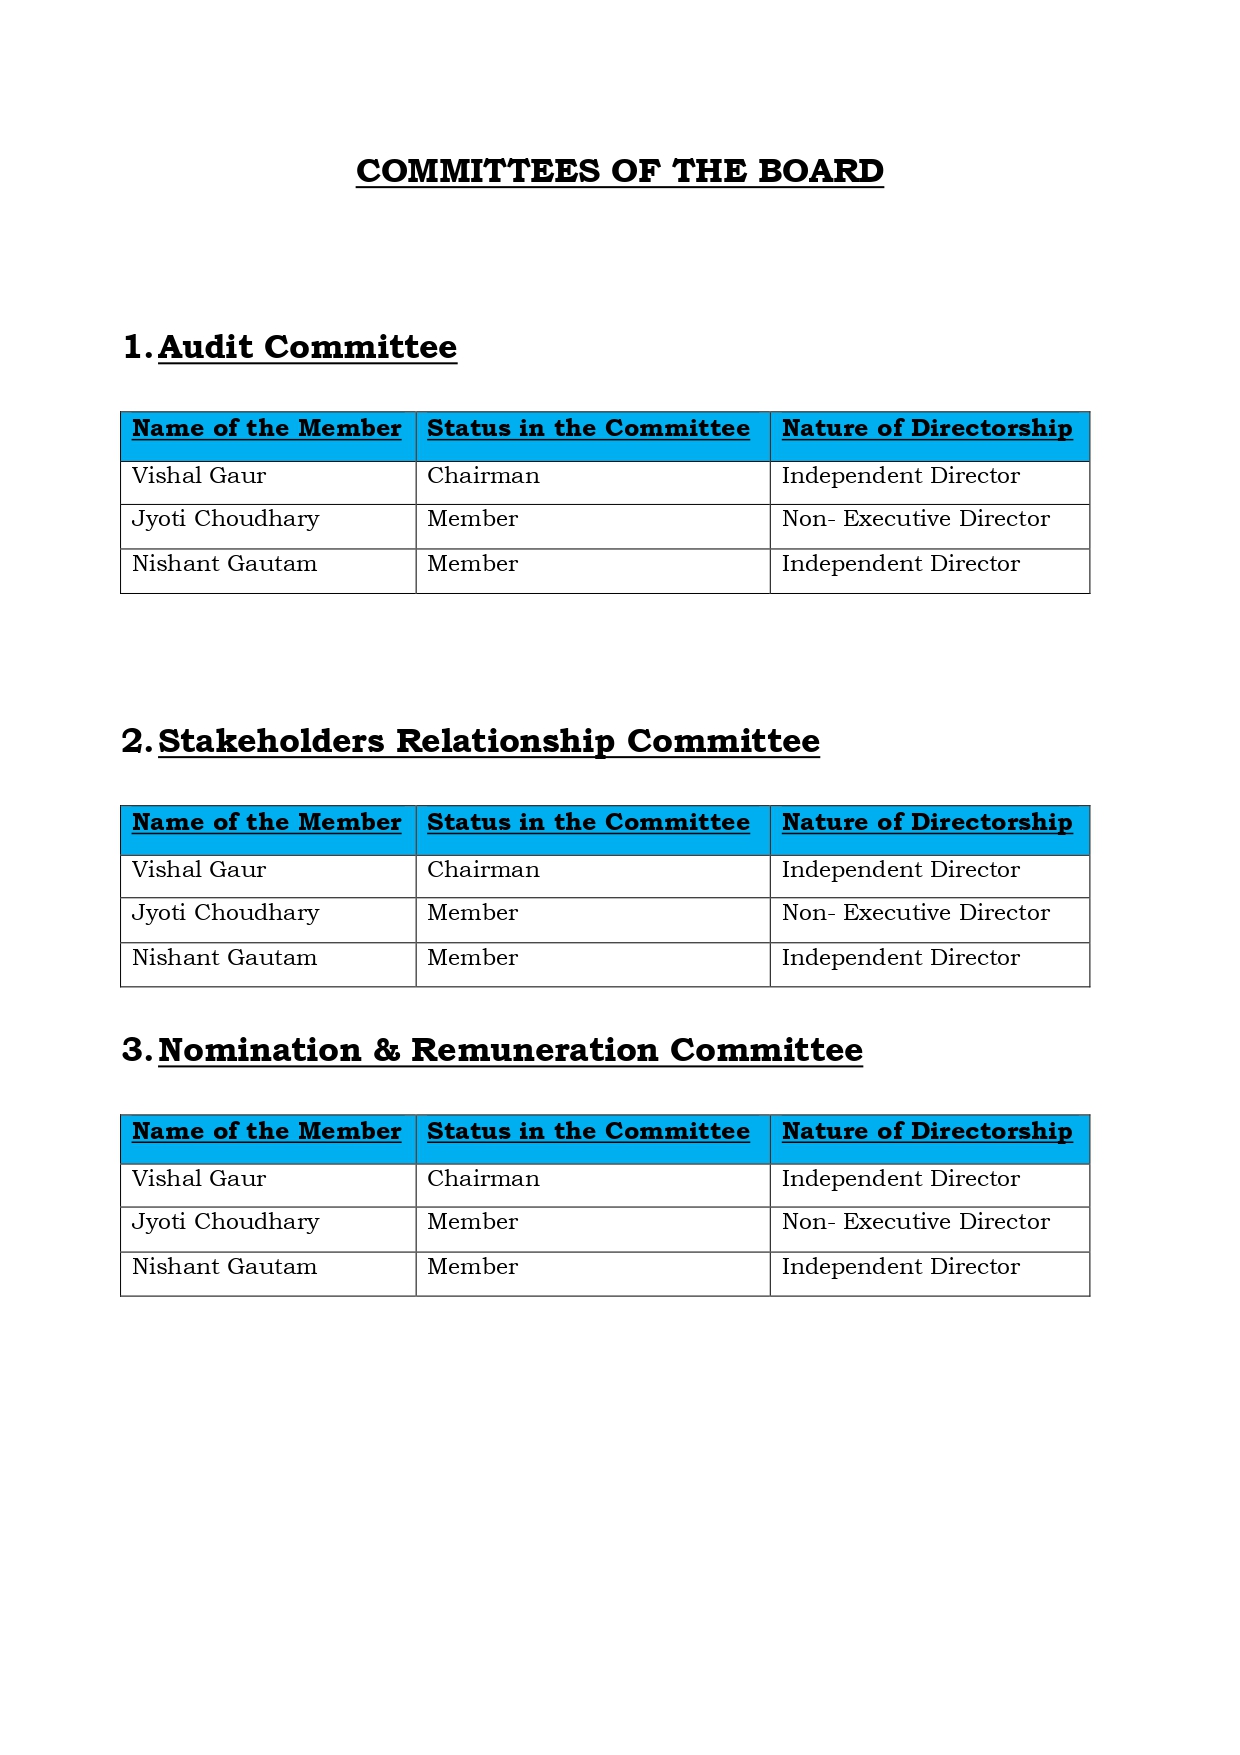 COMMITTEES OF THE BOARD